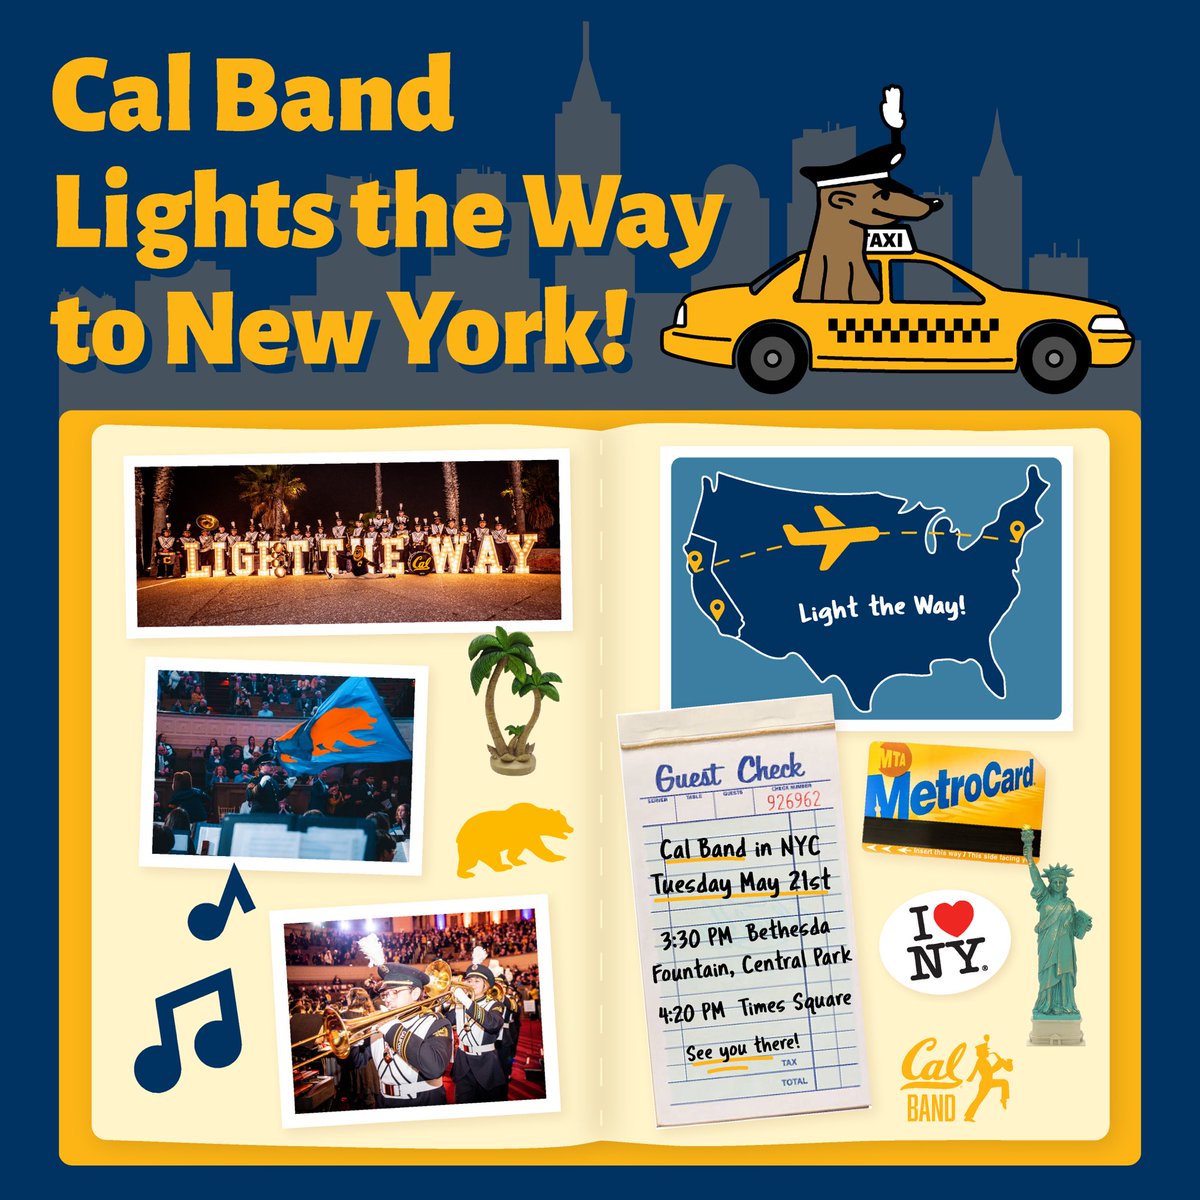 Cal Band is en route to New York to continue celebrating the Light the Way Campaign for UC Berkeley! Join the band as they perform throughout Manhattan on Tuesday, May 21st. Fiat Lux and Go Bears! ✨🐻🗽 Tentative Performance Schedule: 3:30 PM Central Park 4:20 PM Times Square